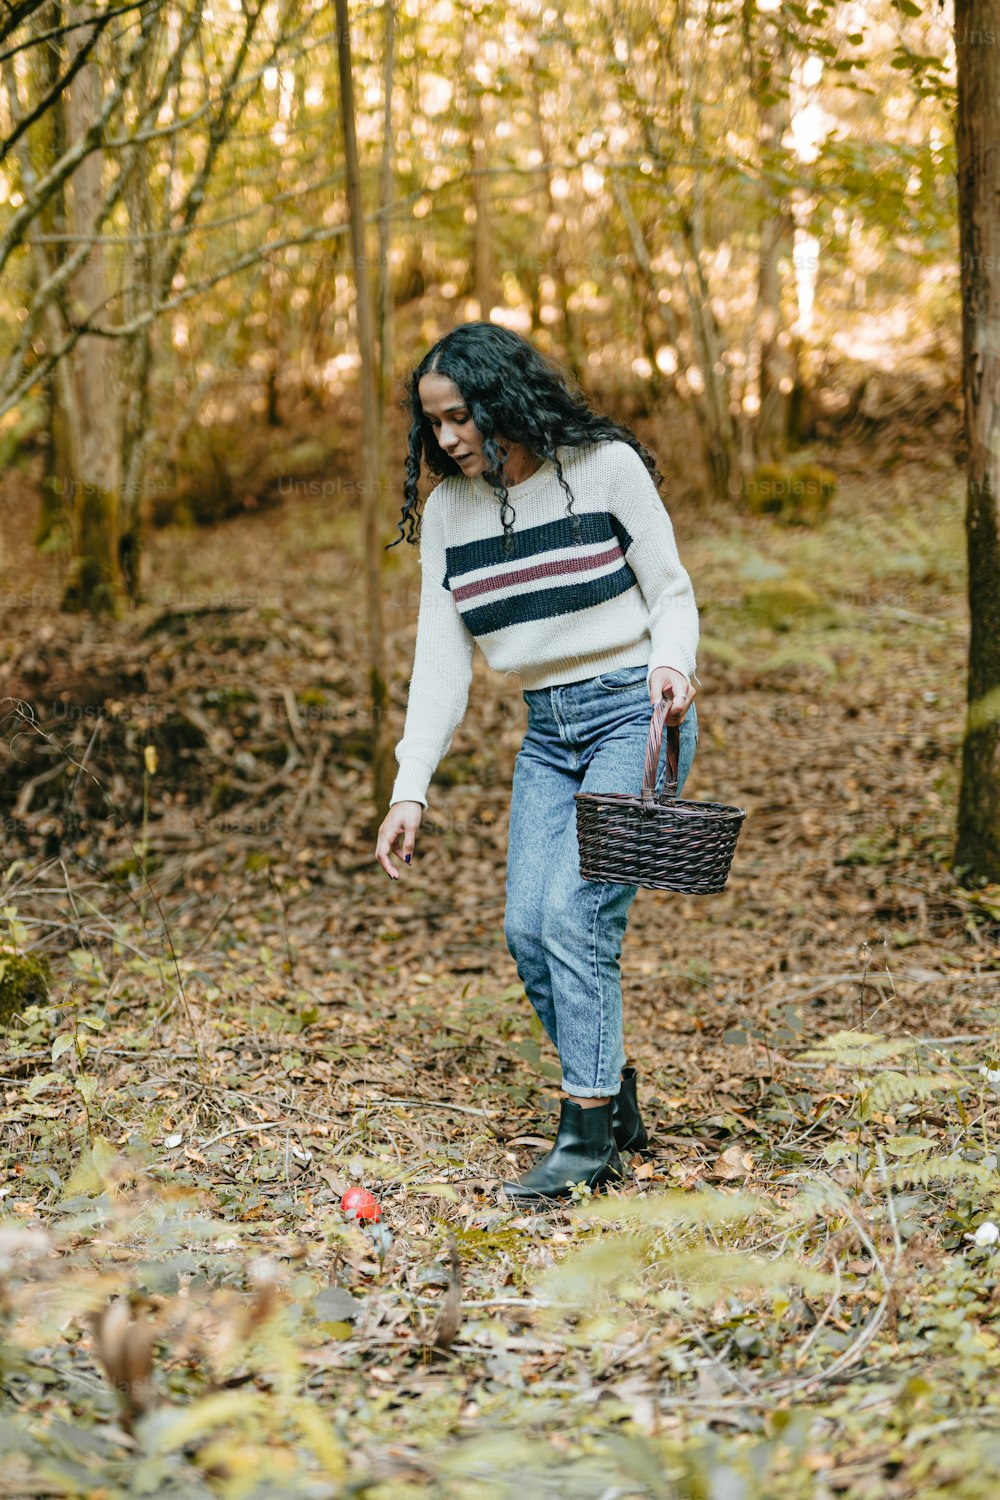 a woman walking through a forest carrying a basket